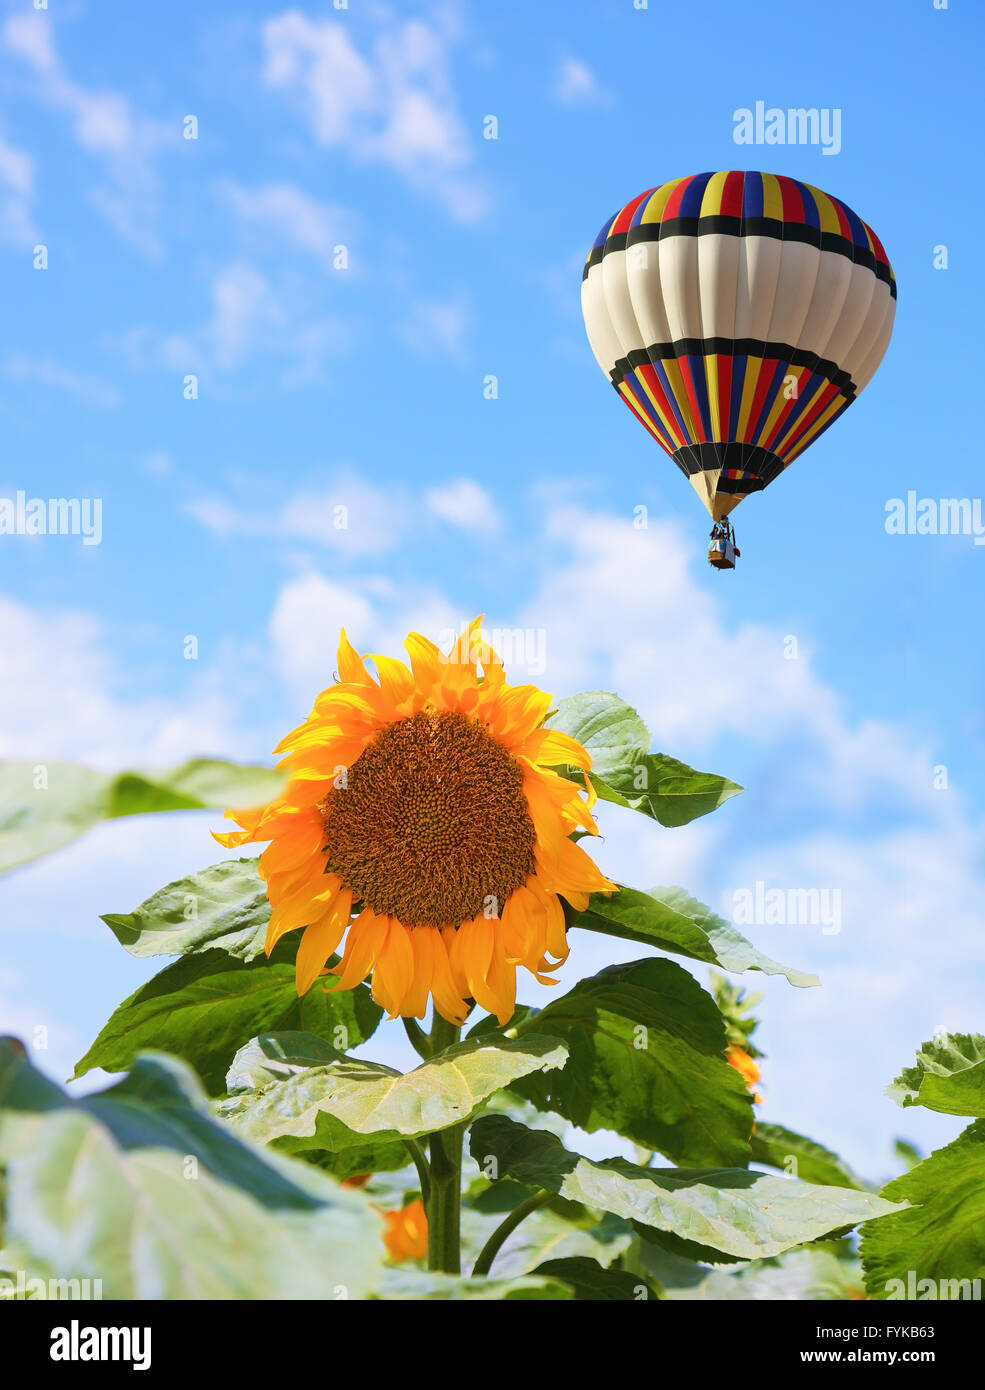 The balloon flying over a field of sunflowers Stock Photo